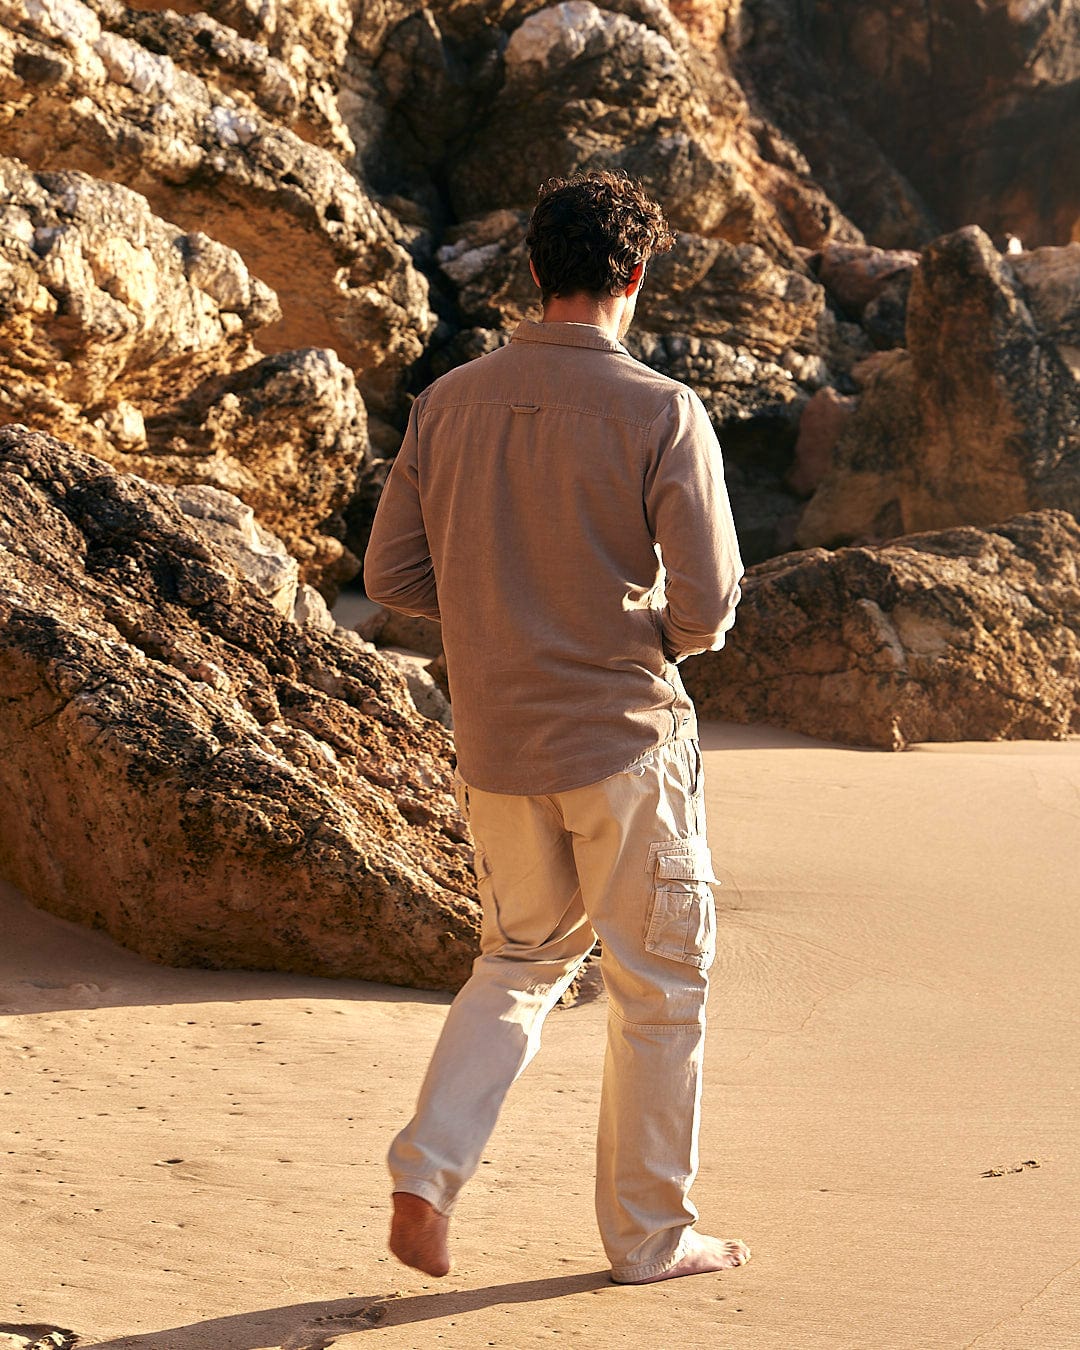 A man wearing Saltrock's Godrevy - Mens Cargo Trouser in Cream walks on the beach with a frisbee.